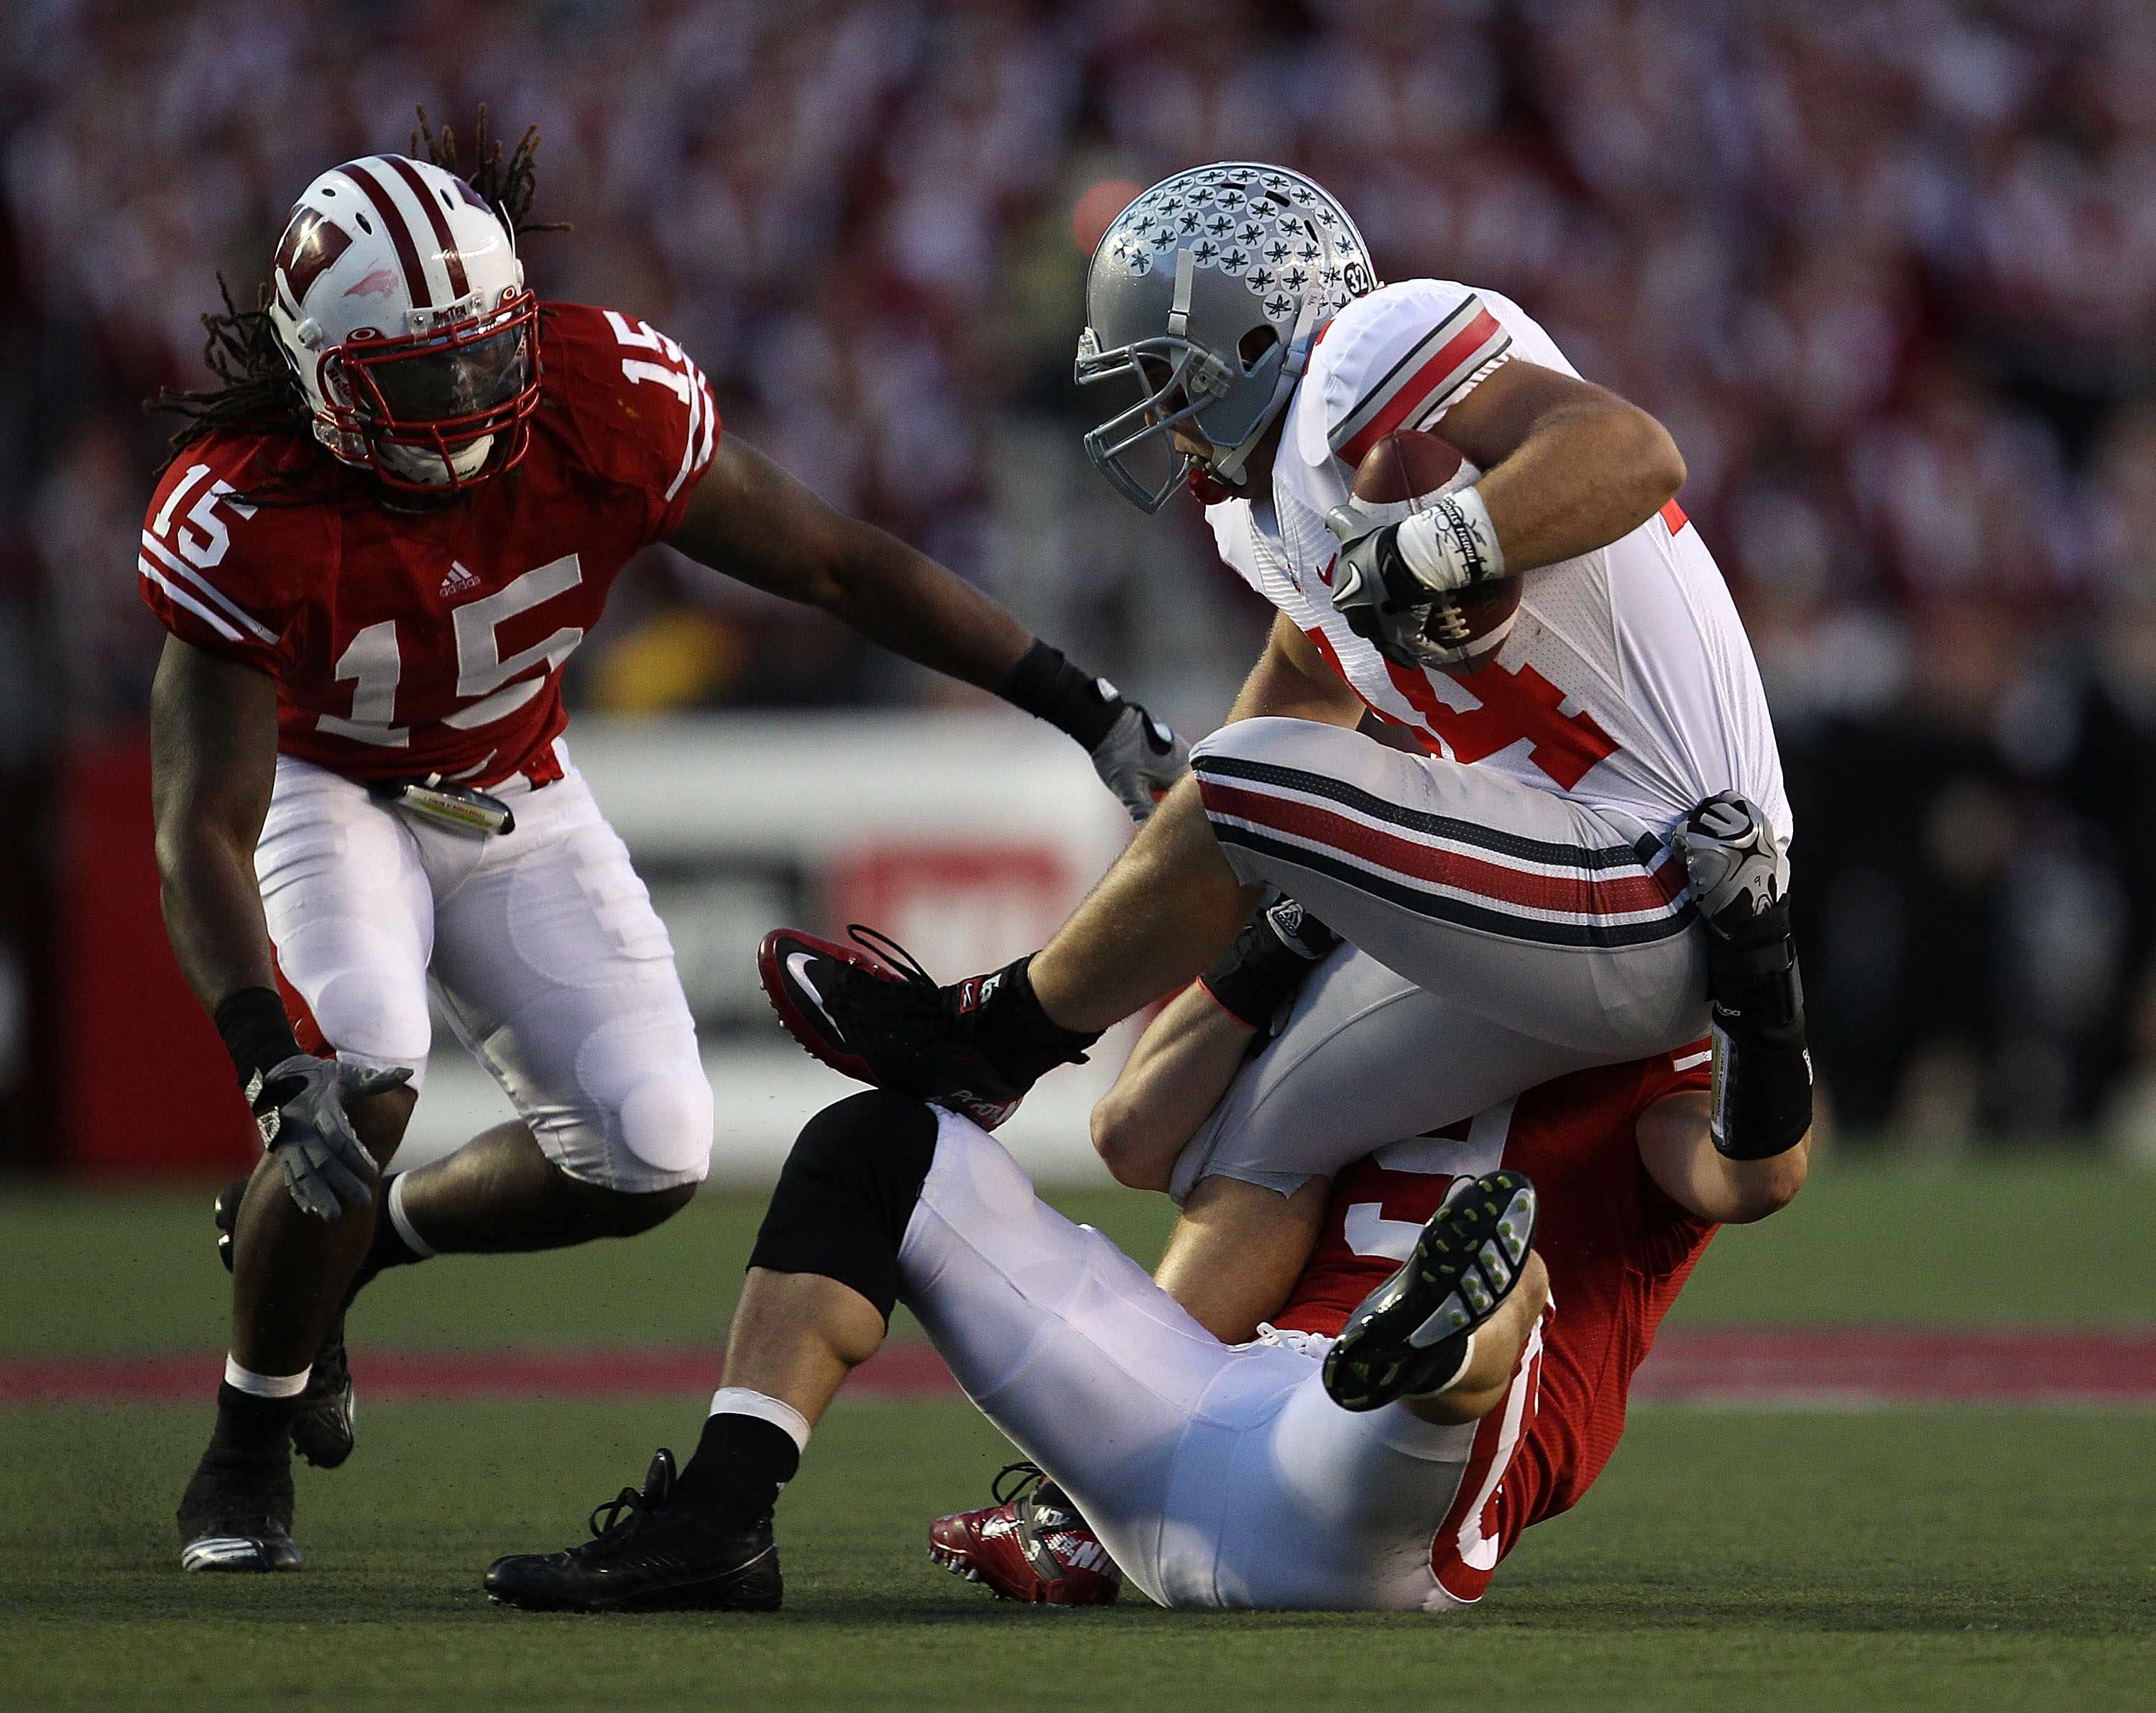 MADISON, WI - OCTOBER 16: Zach Boren #44 of the Ohio State Buckeyes is tackled by Blake Sorensen #9 and Culmer St. Jean #15 of the Wisconsin Badgers at Camp Randall Stadium on October 16, 2010 in Madison, Wisconsin. Wisconsin defeated Ohio State 31-18. (P